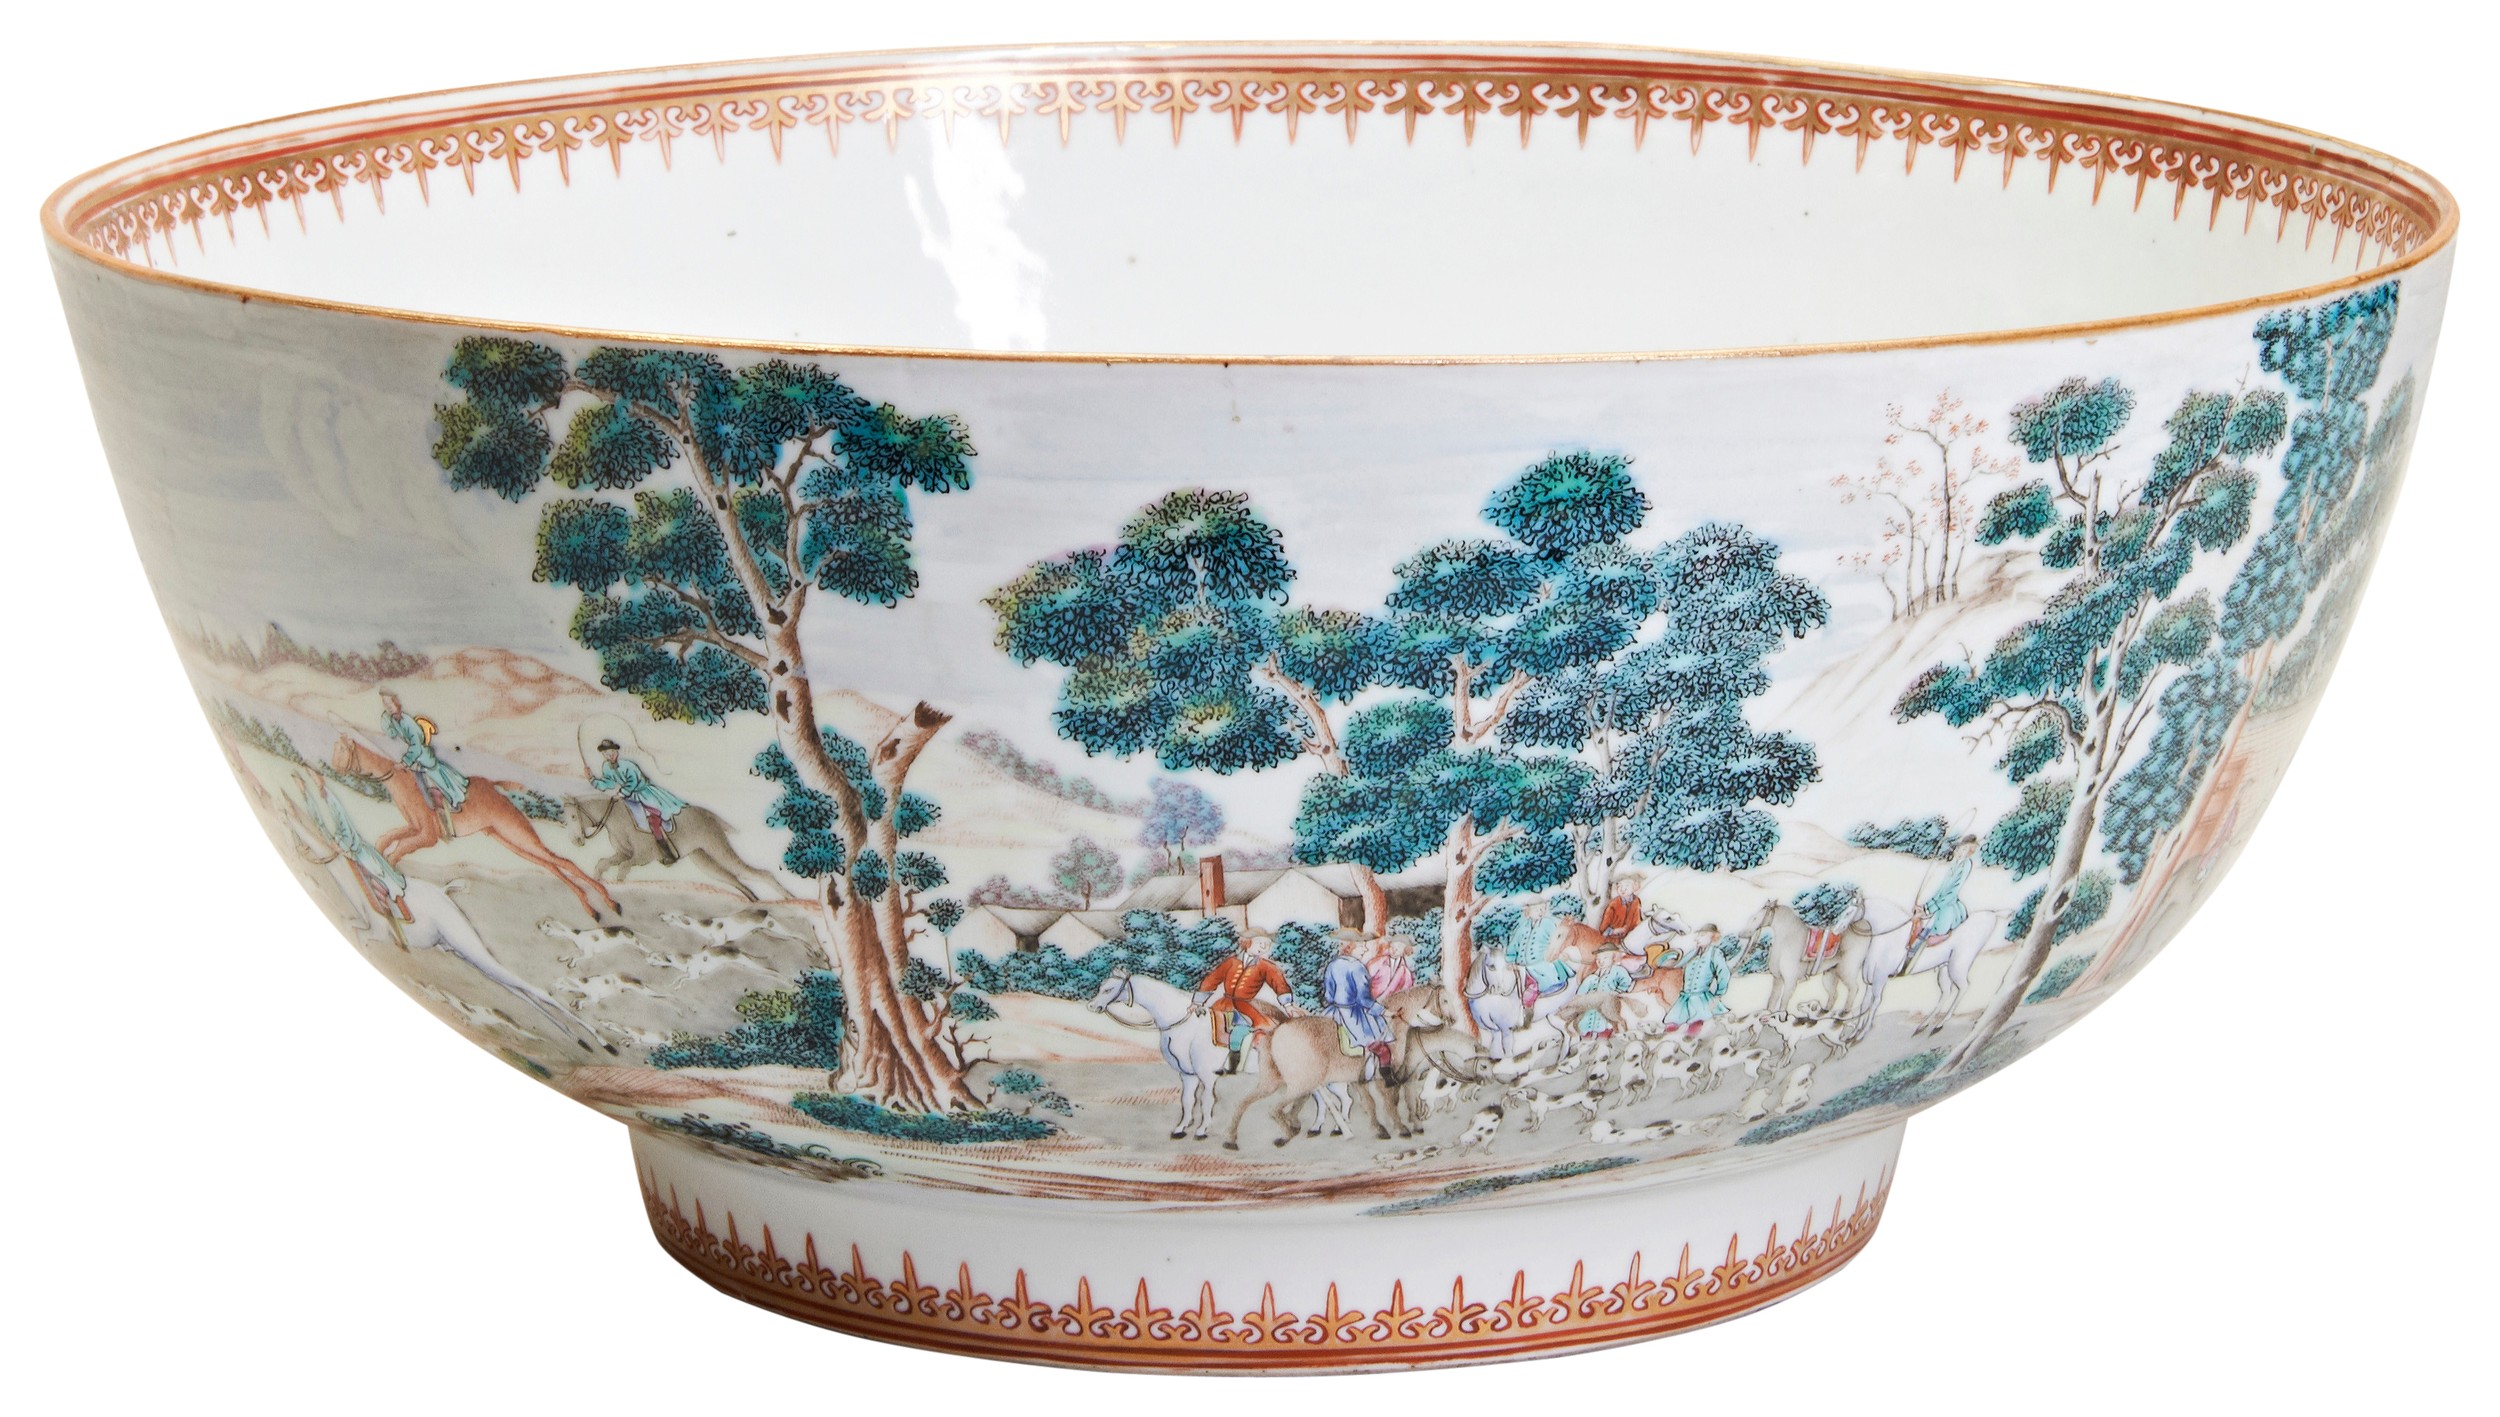 A LARGE CHINESE EXPORT 'HUNTING SUBJECT' BOWL QIANLONG PERIOD (1736-1795) the exterior painted